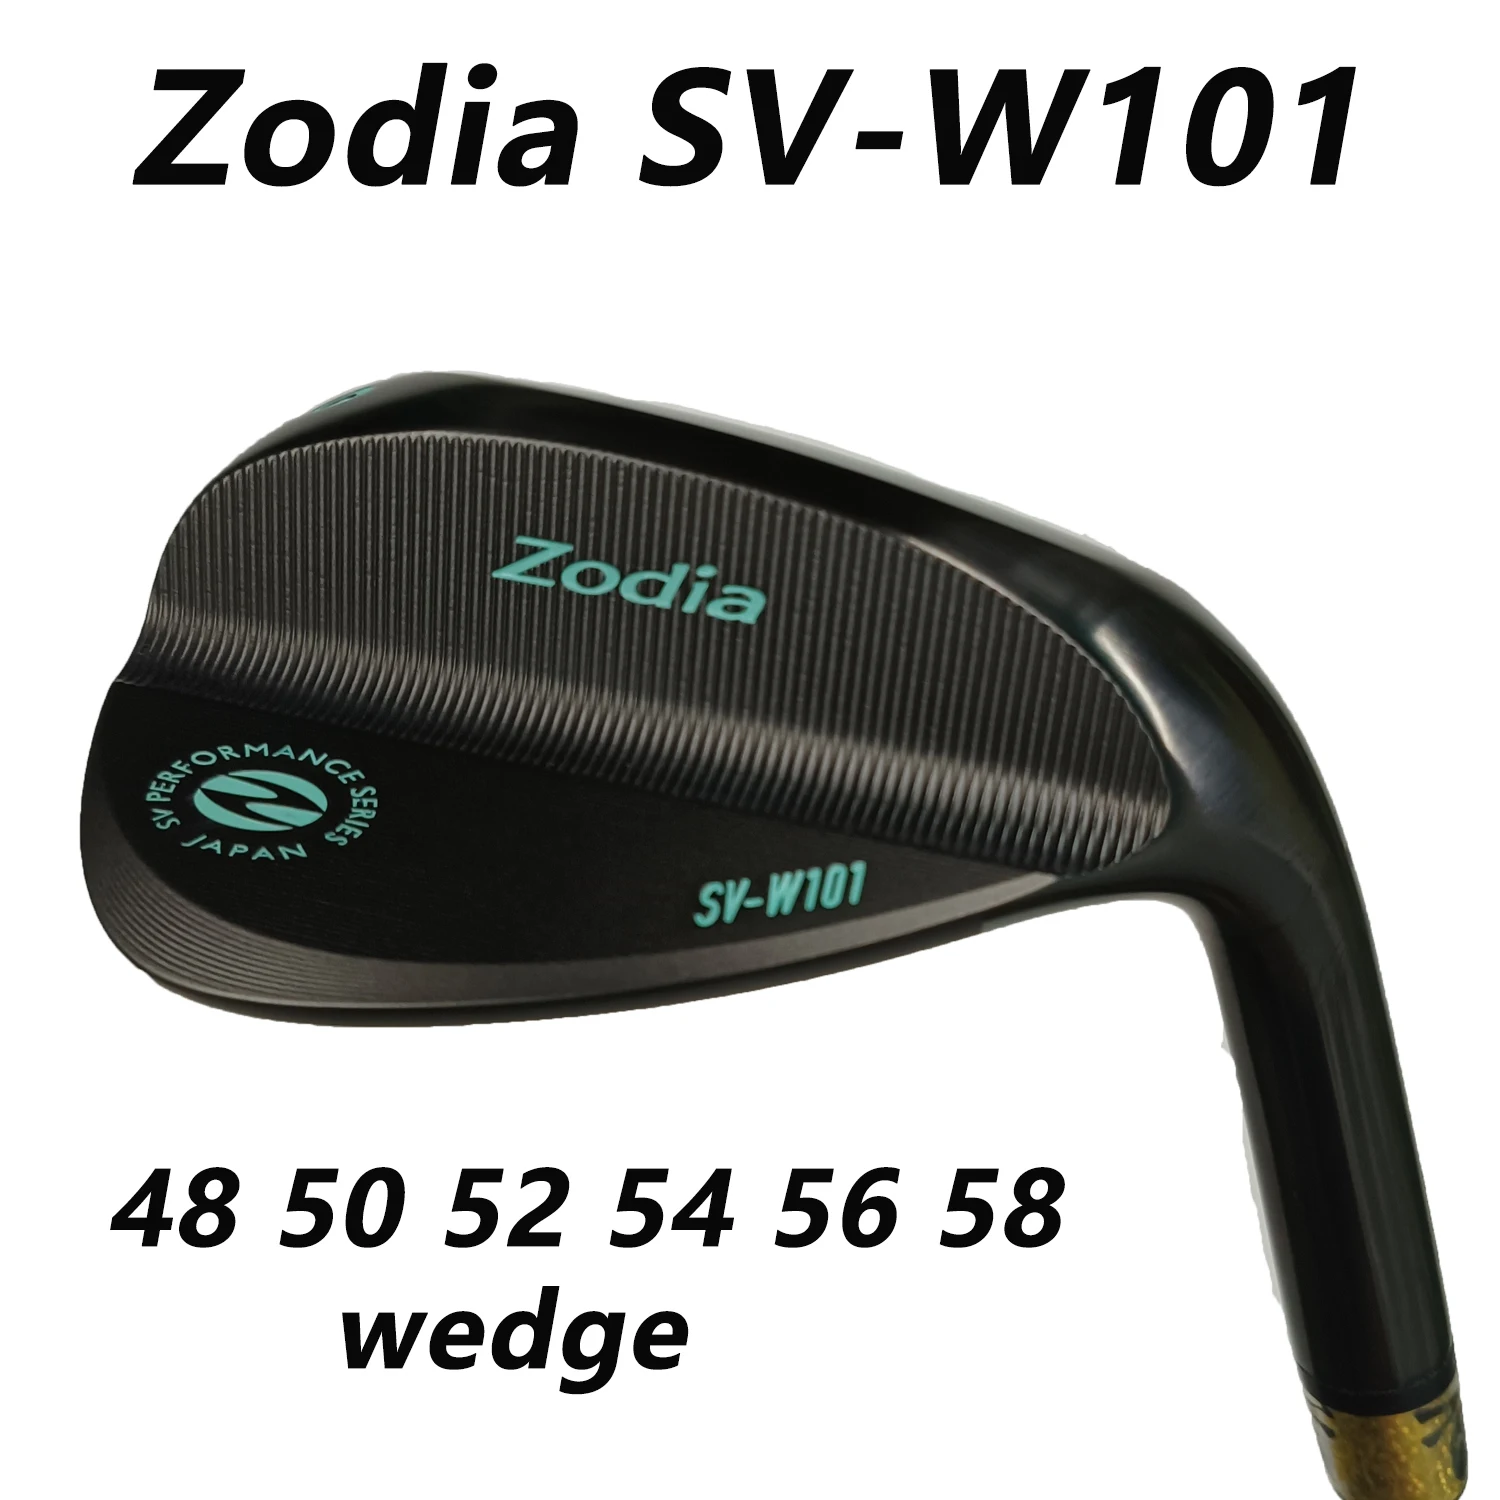 

Zodia-SV-W101 Wedge Golf Wedges, ZODIA Golf Clubs, Steel Shaft, Ferrule and Grip are Optional, 48 , 50 , 52 , 54 , 56 , 58